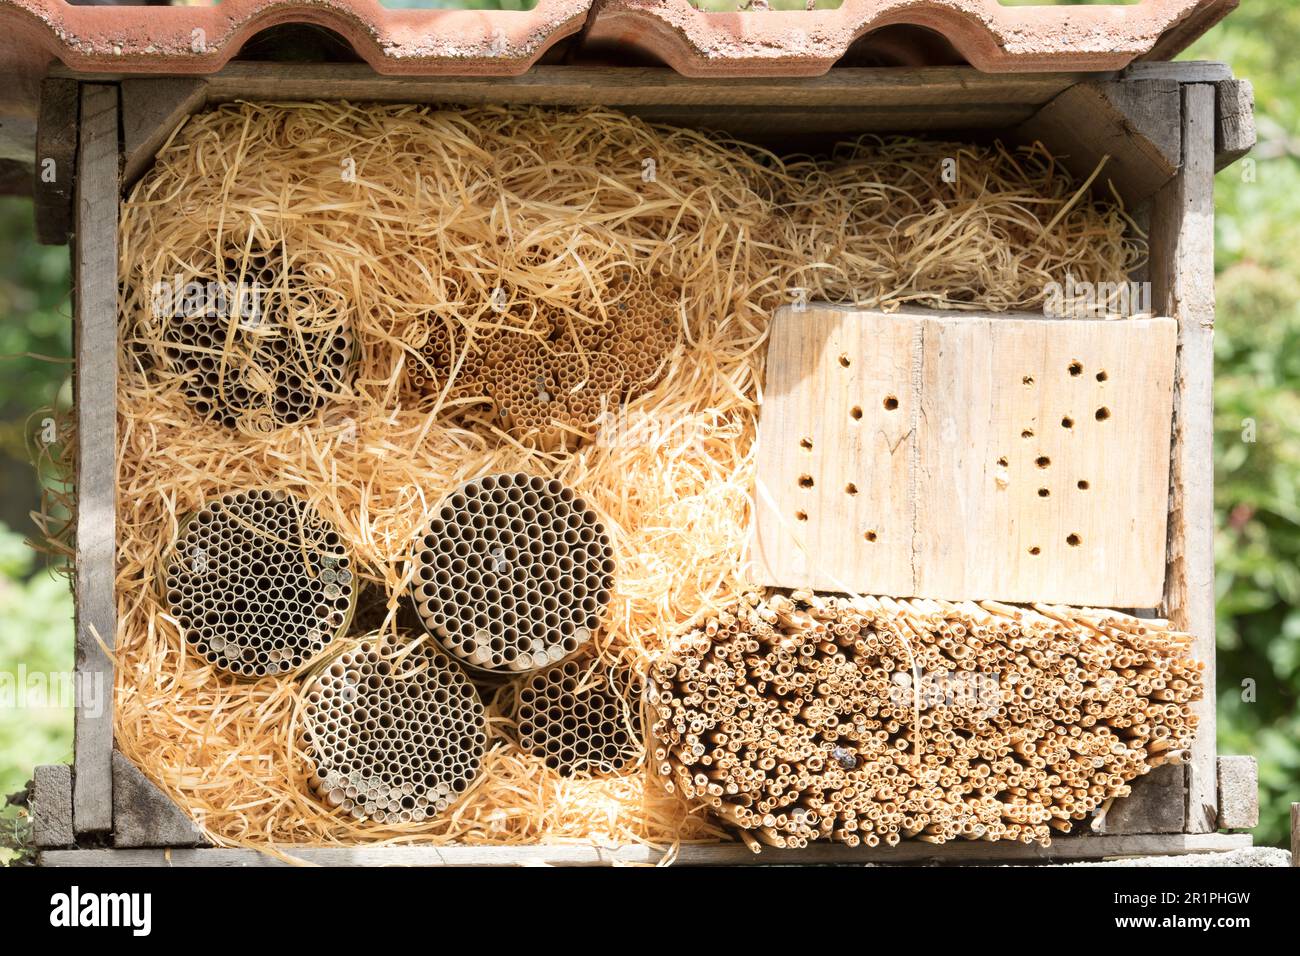 Insect hotel, wood, garden, summer, nature, still life, Zella, Thuringia, Germany, Stock Photo